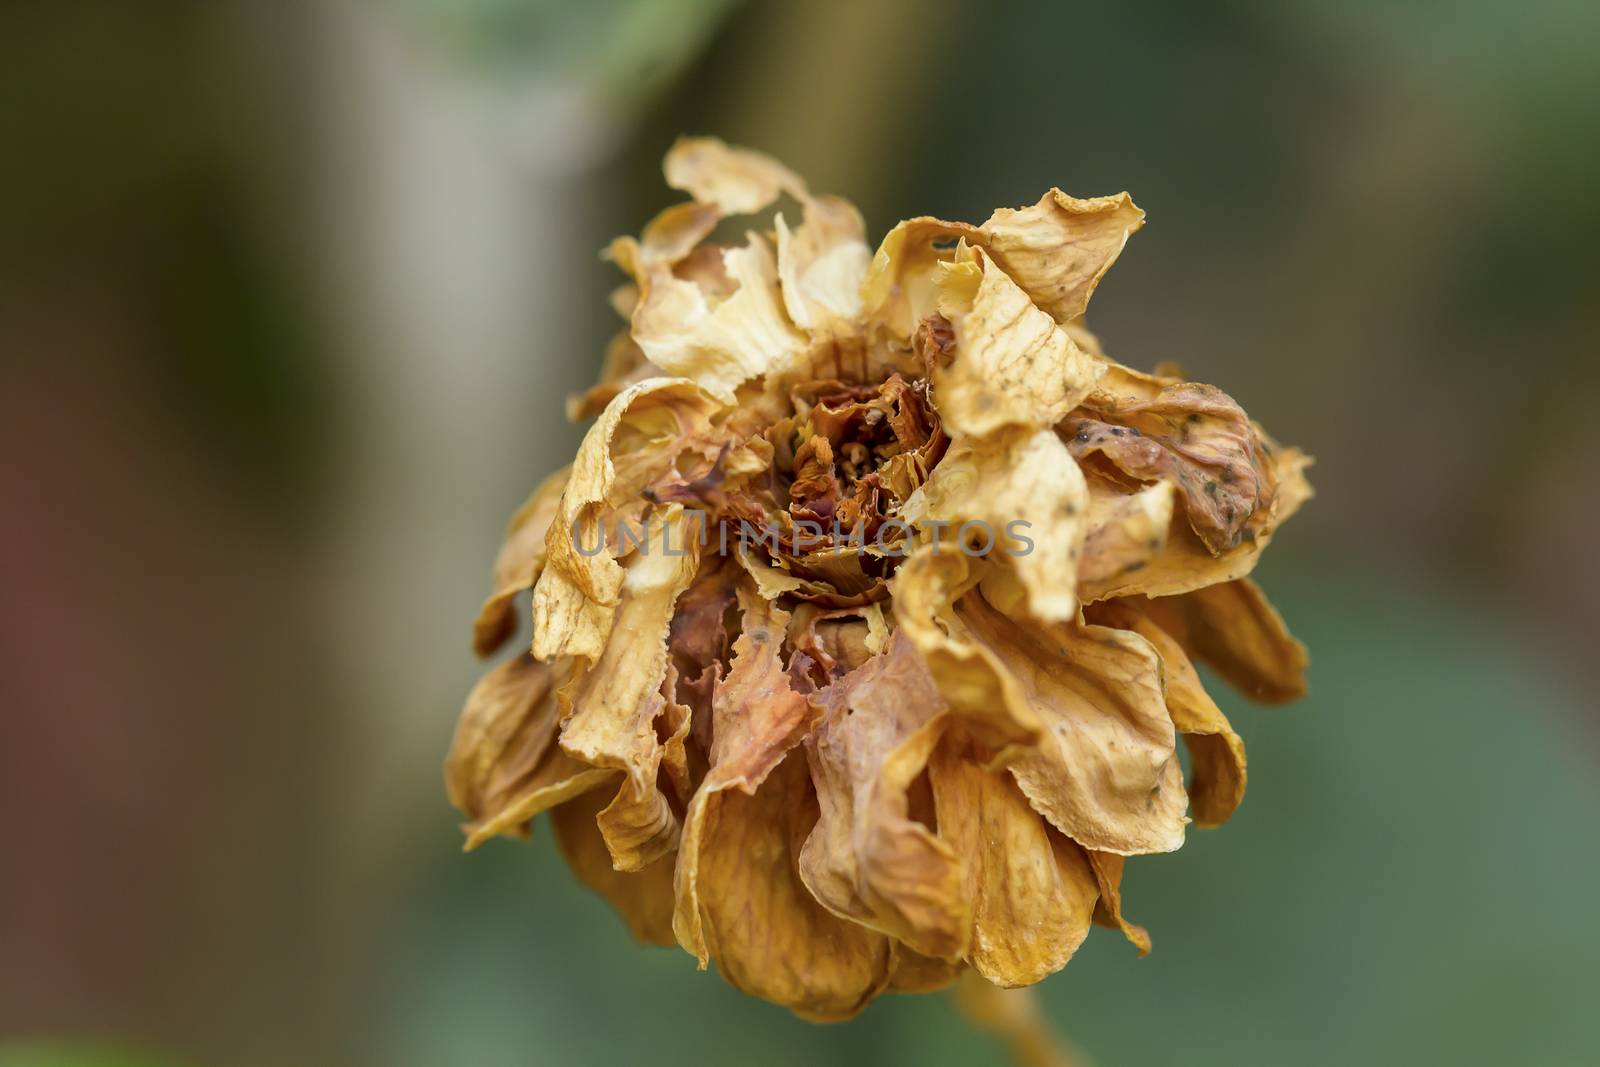 Withered and dried jasmine flower by olovedog